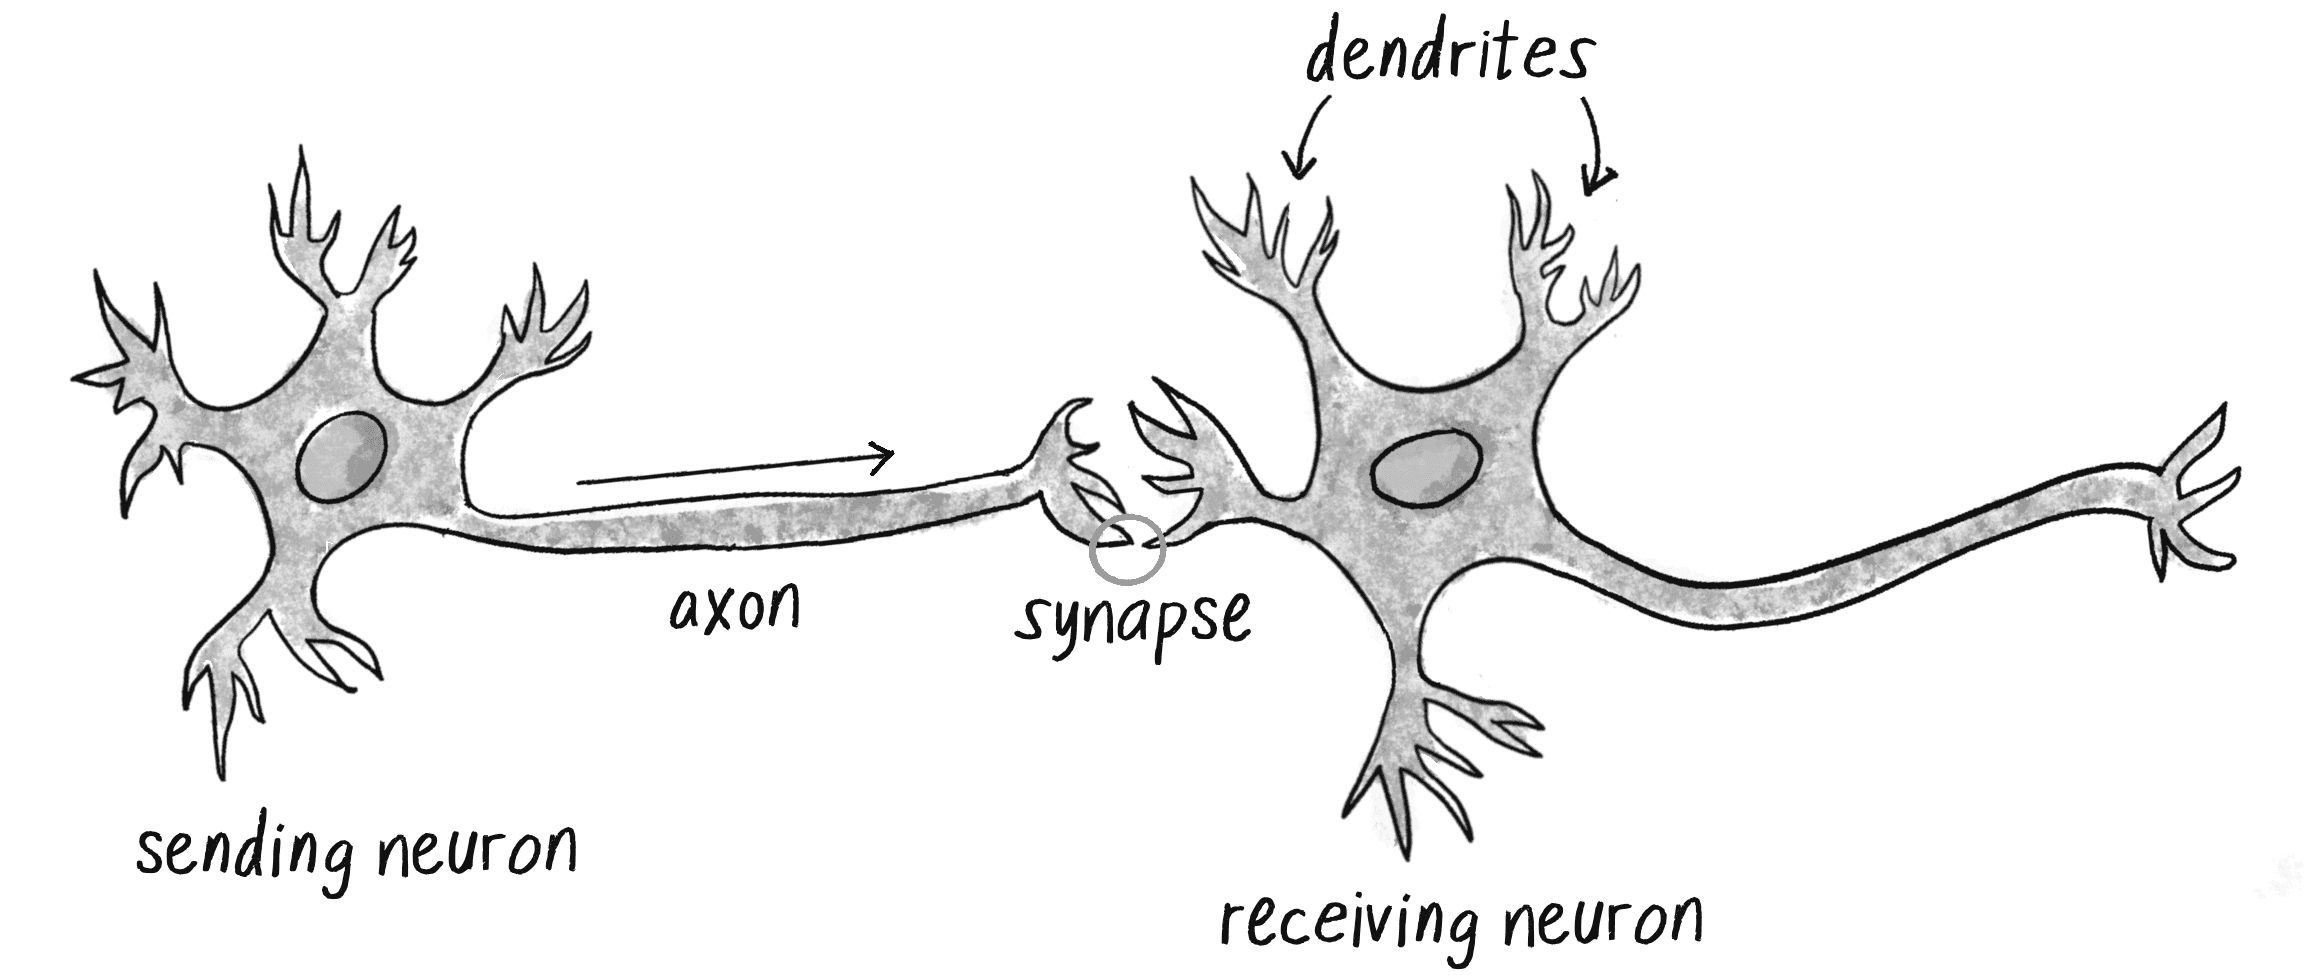 Figure 10.1: A neuron with dendrites and an axon connected to another neuron